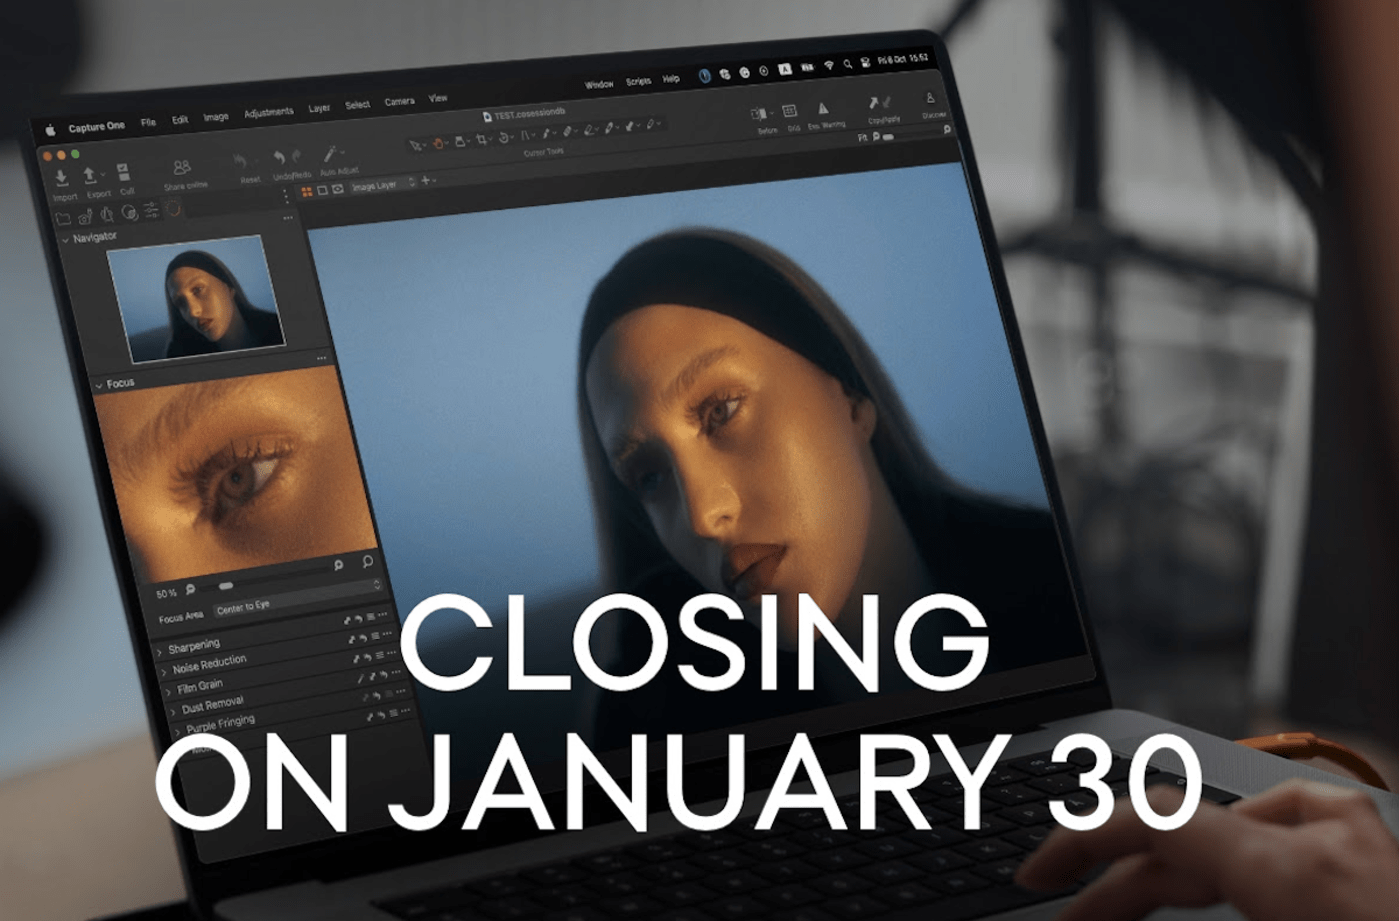 Capture One is axing the free tier of its photo-editing software on January 30